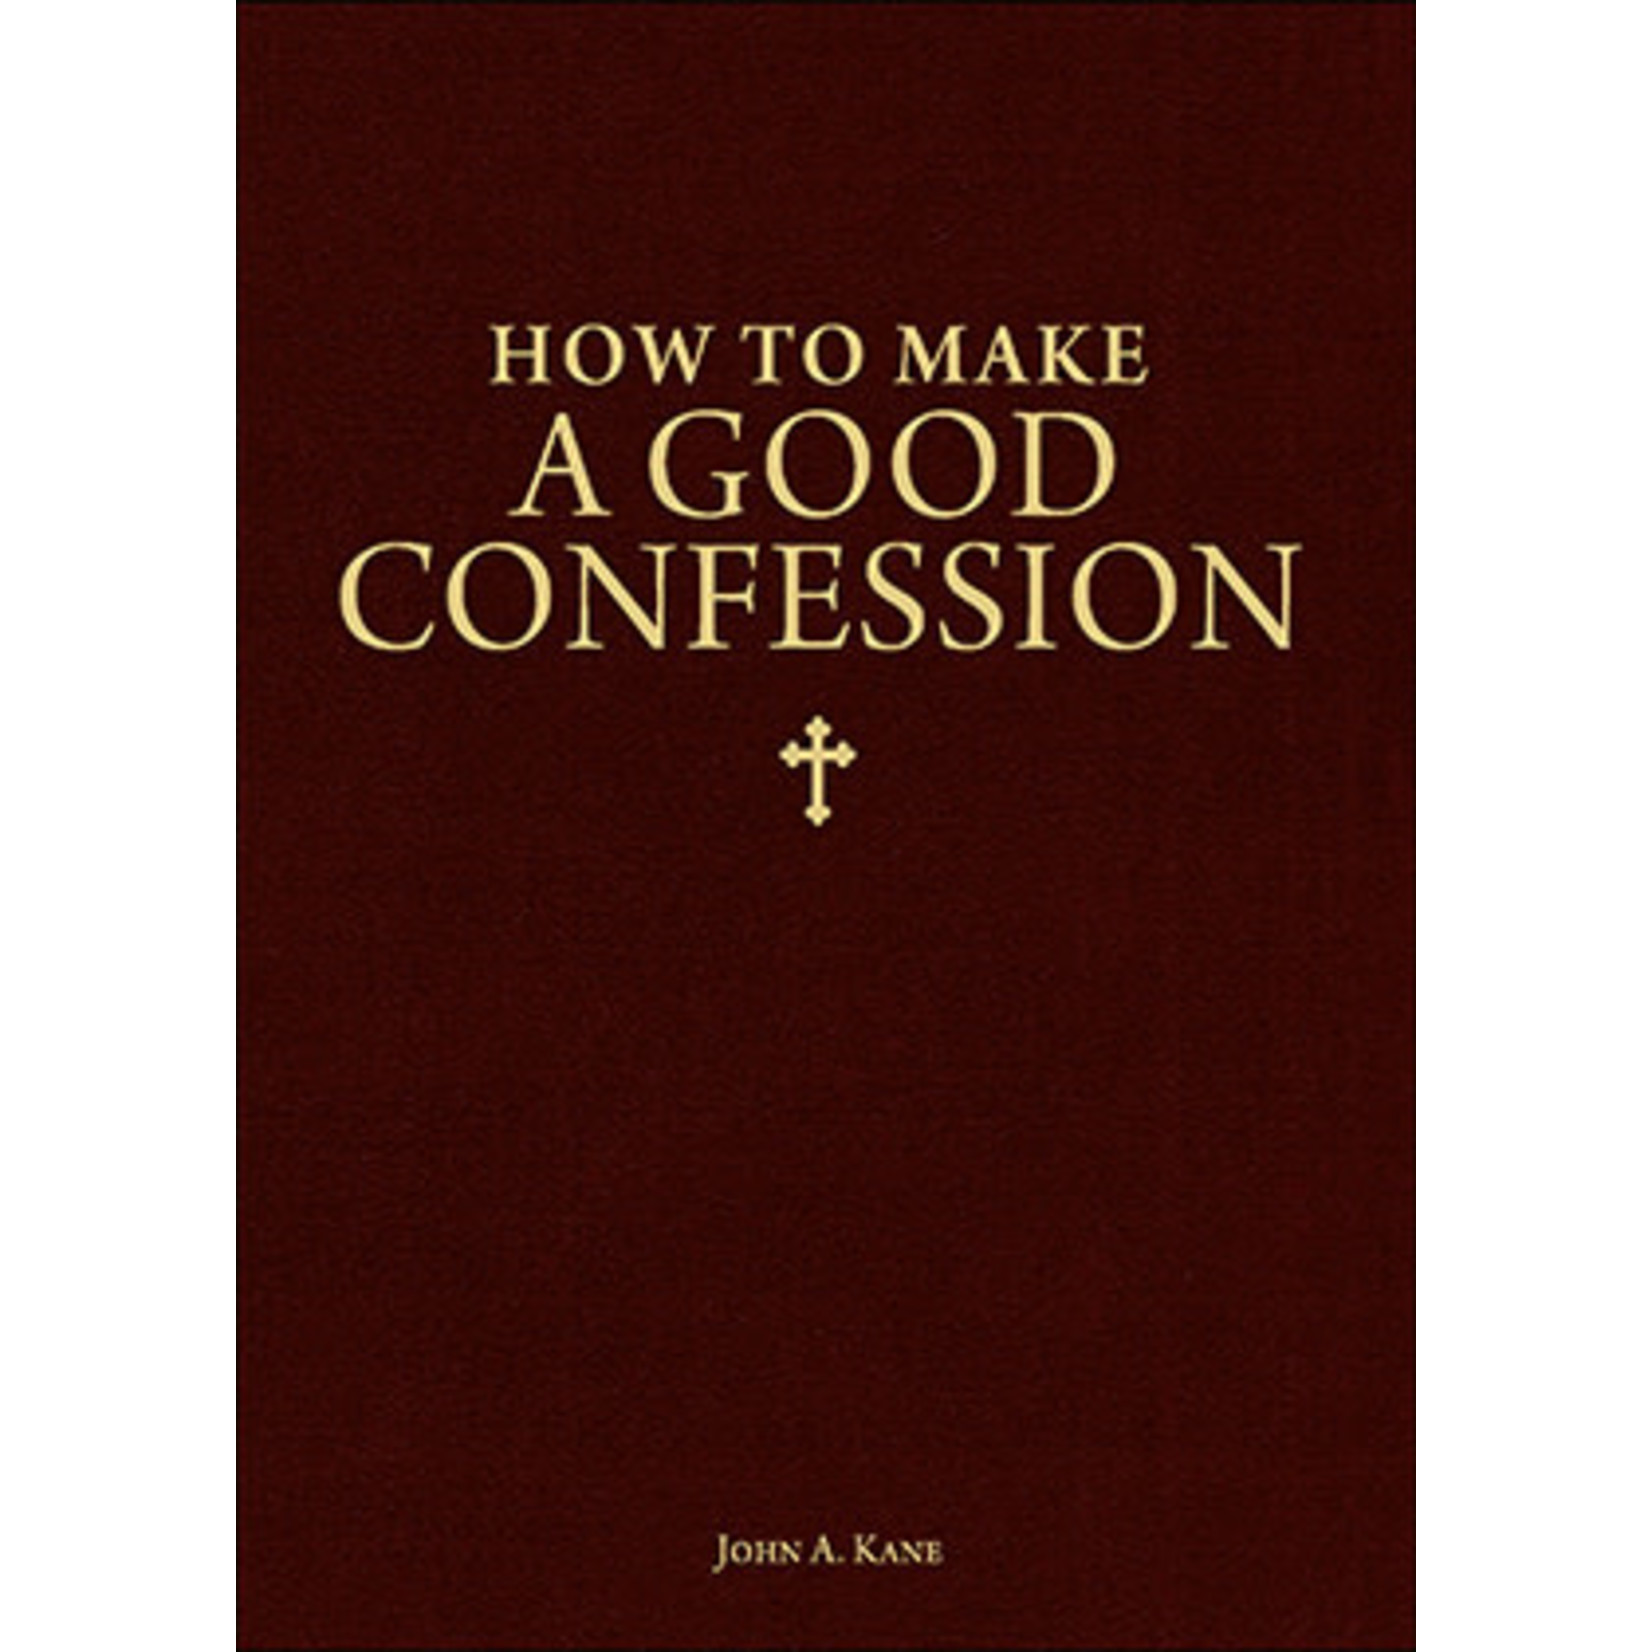 How to Make a Good Confession